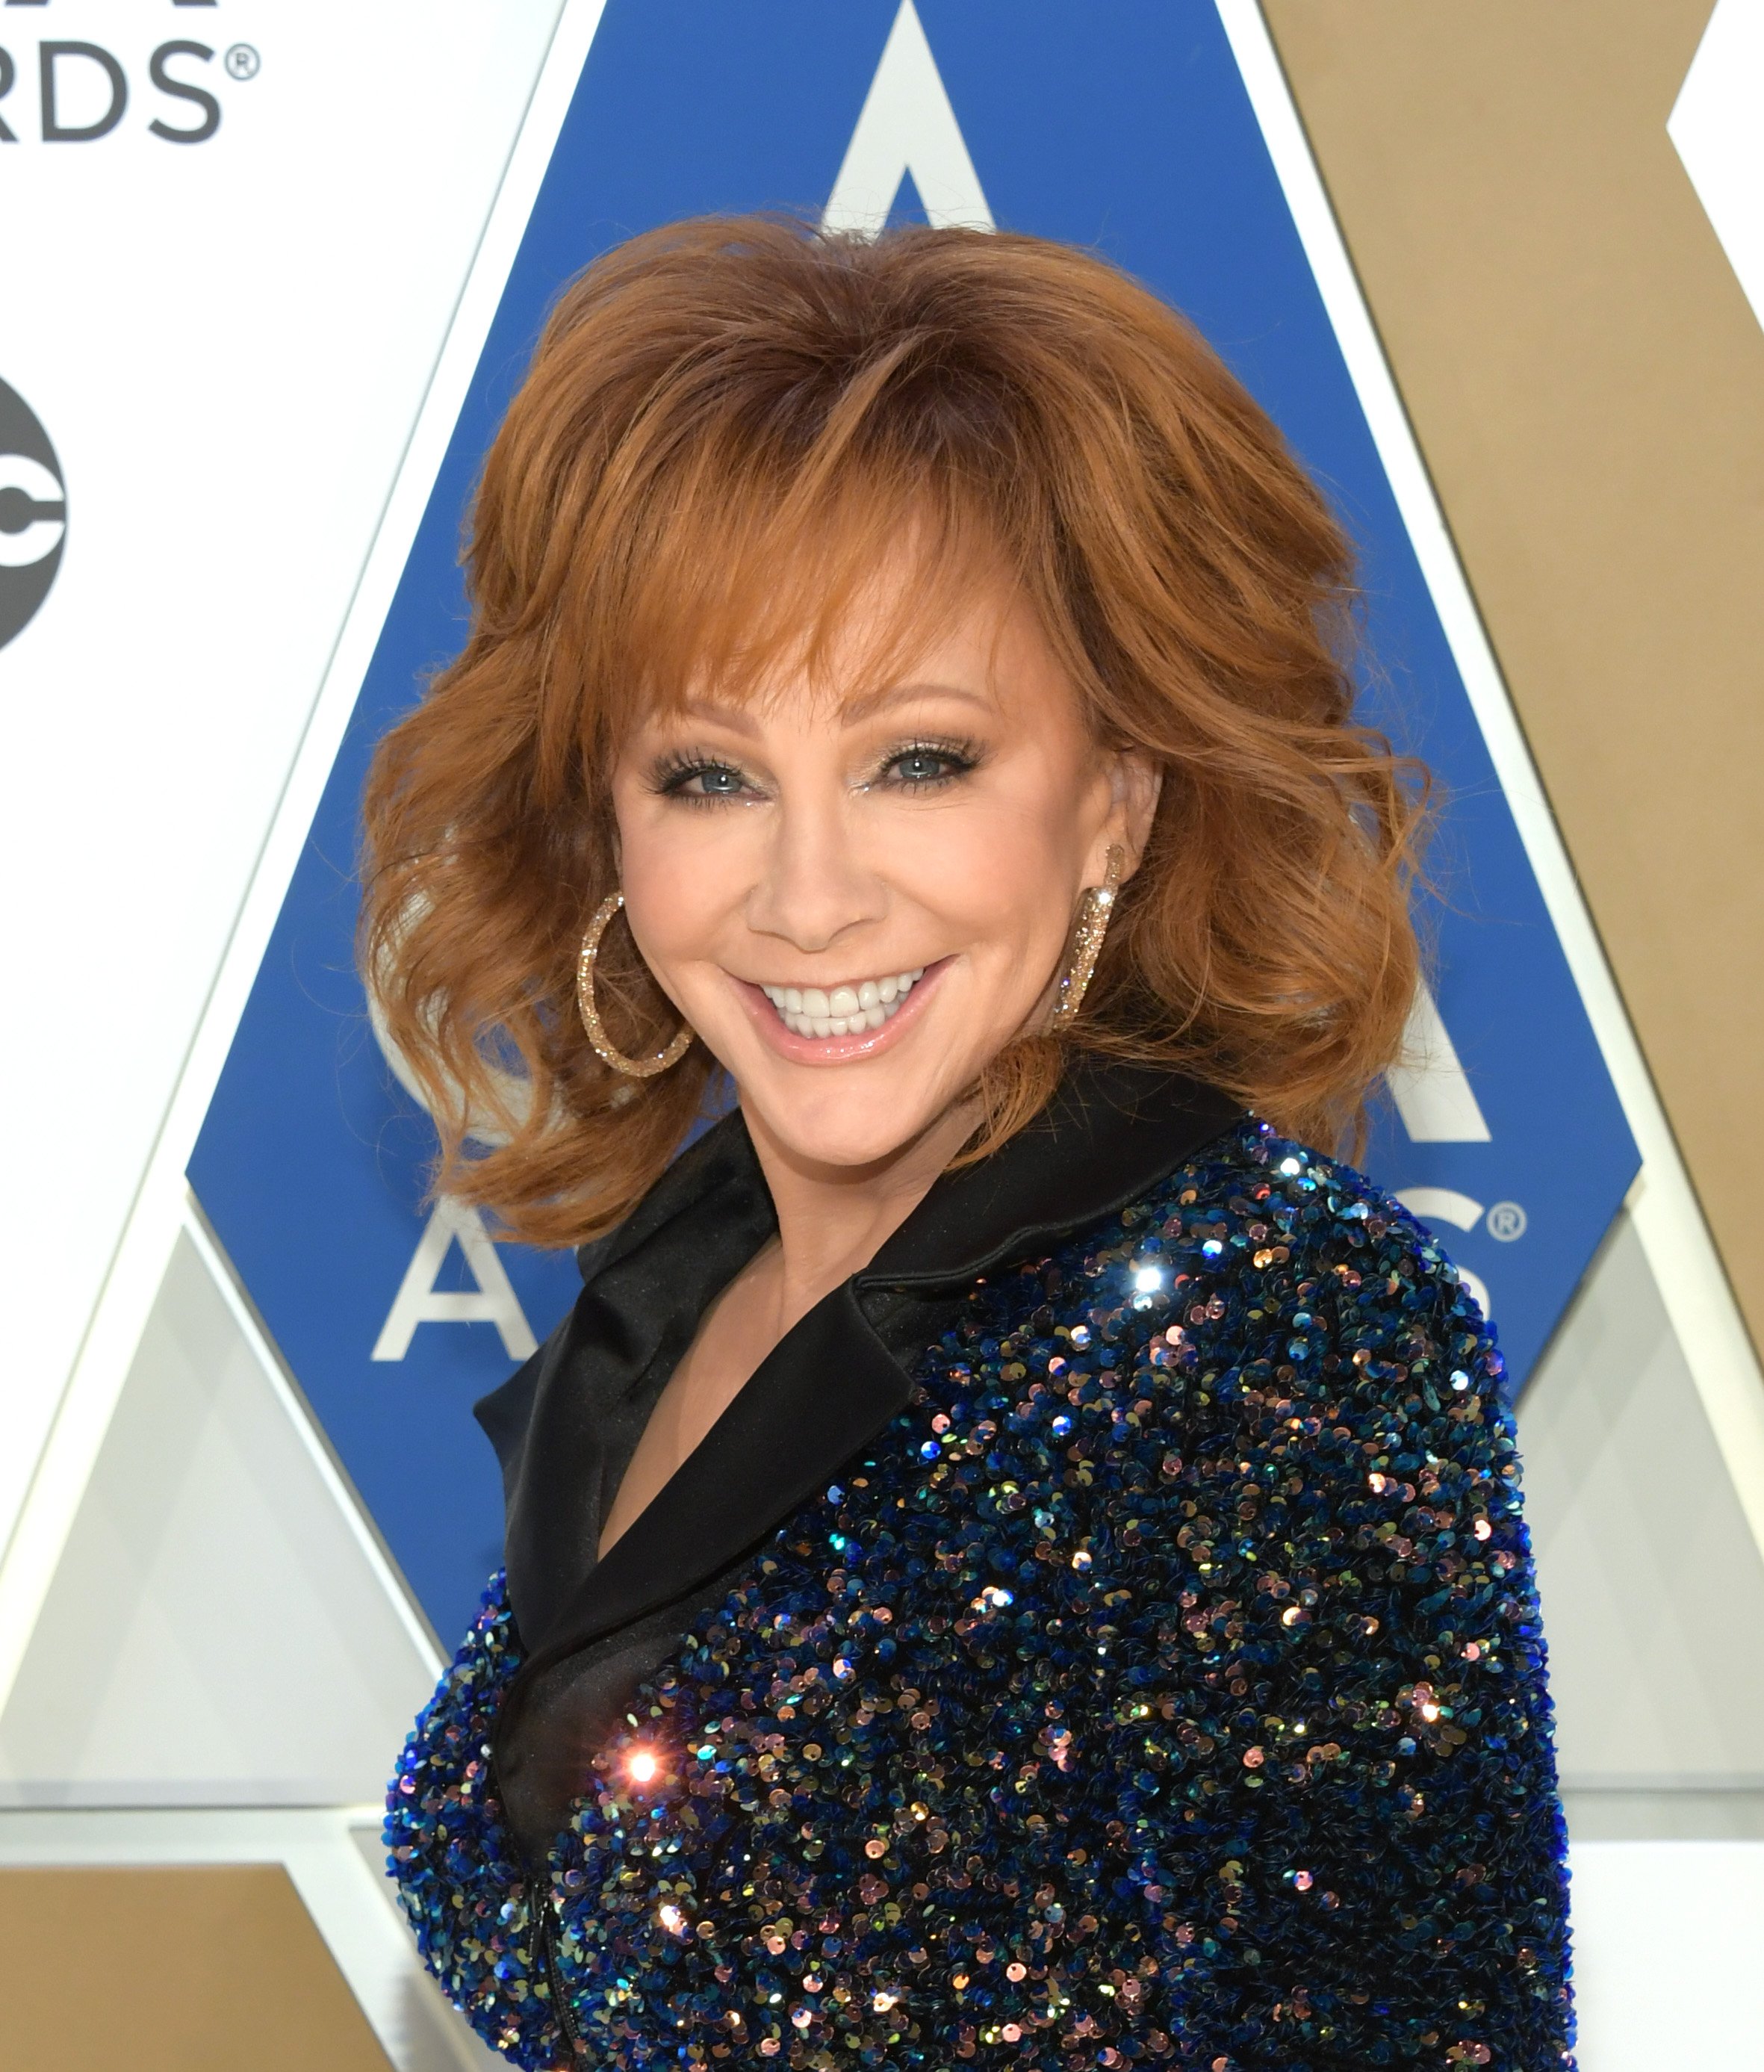 Reba McEntire attends the 54th annual CMA Awards at the Music City Center on November 11, 2020 | Photo: Getty Images